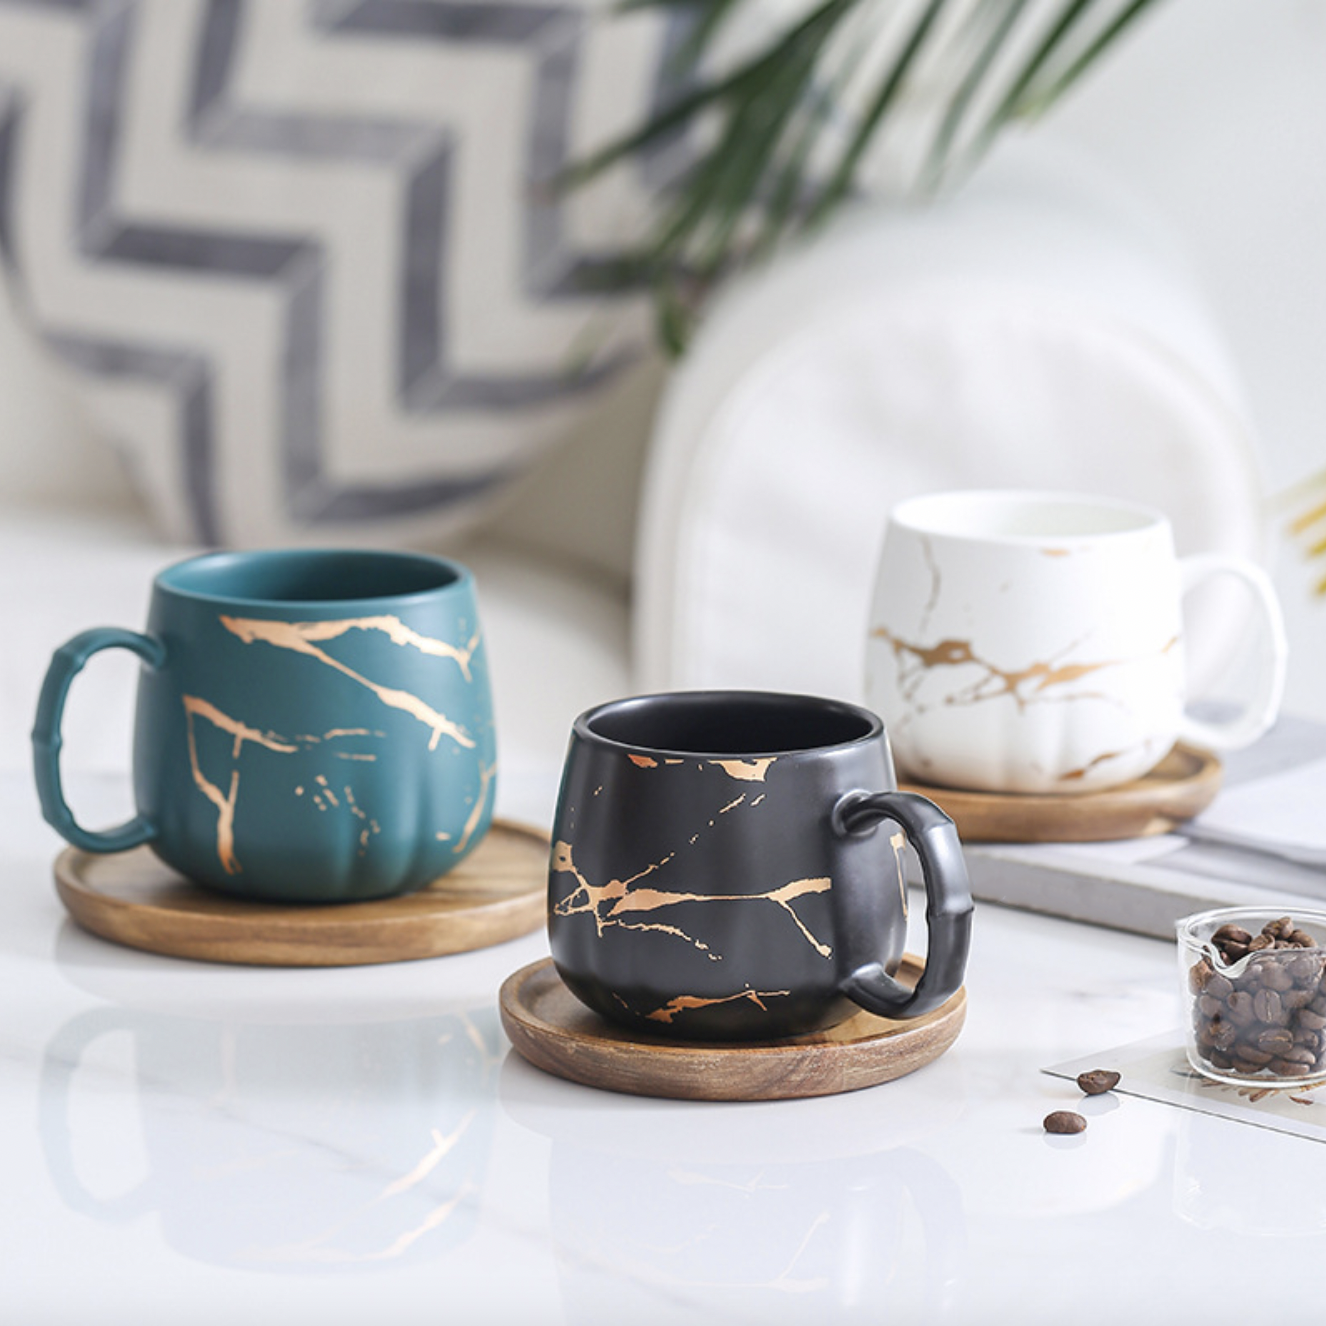 Midnight Black Handcrafted Ceramic Tea Cup & Saucer - Set Of 6